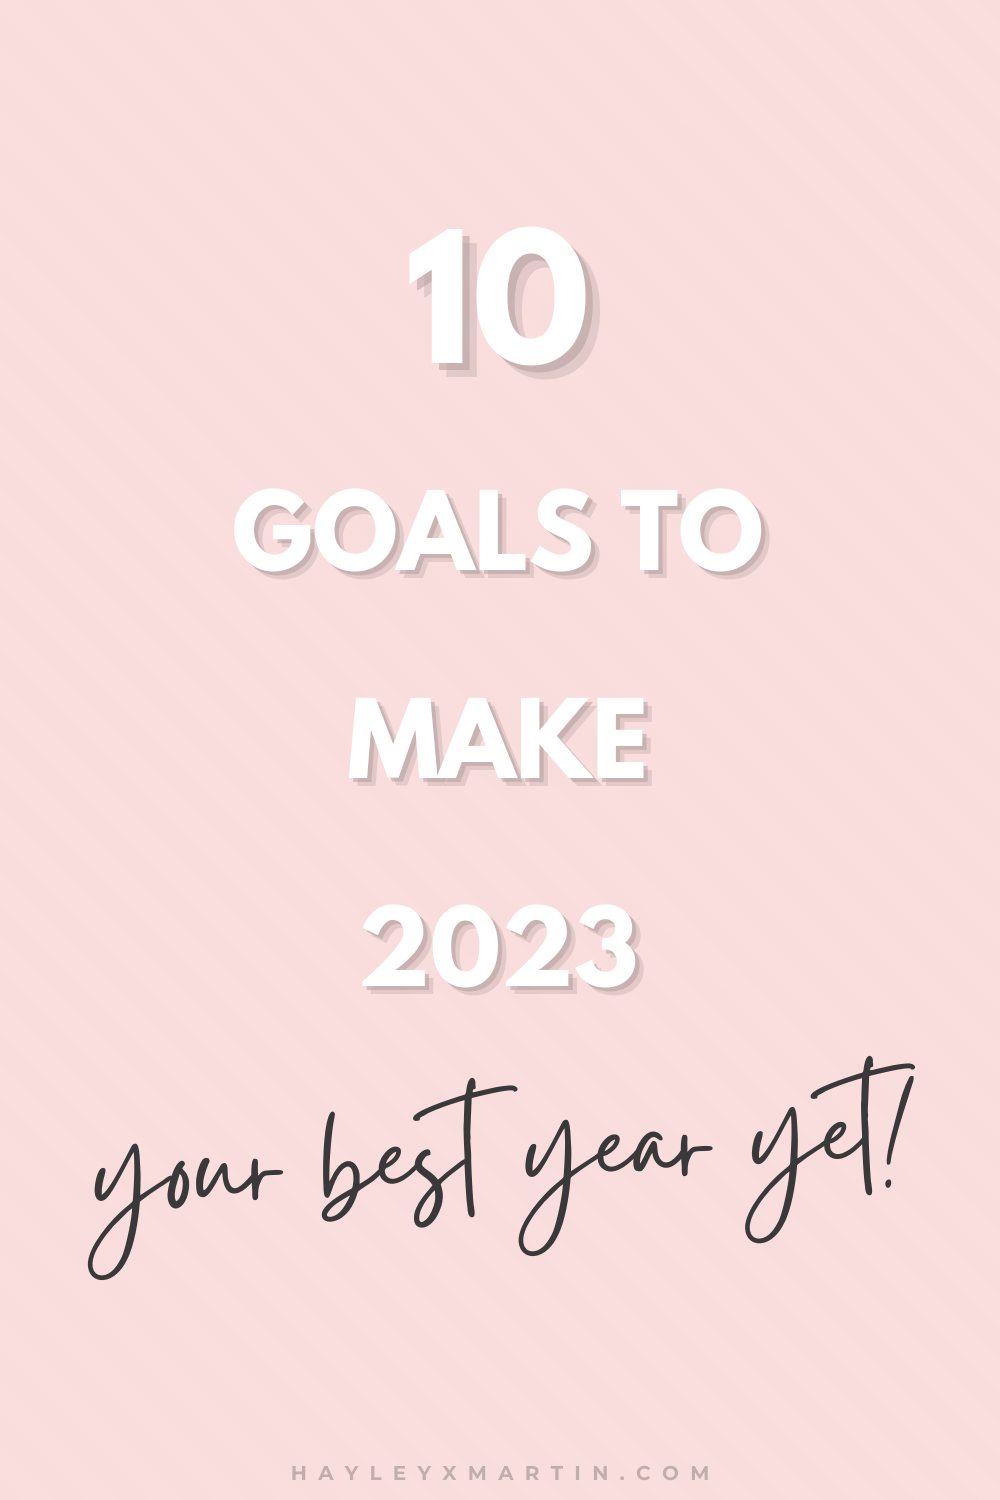 10 Goals to transform your life in 2023